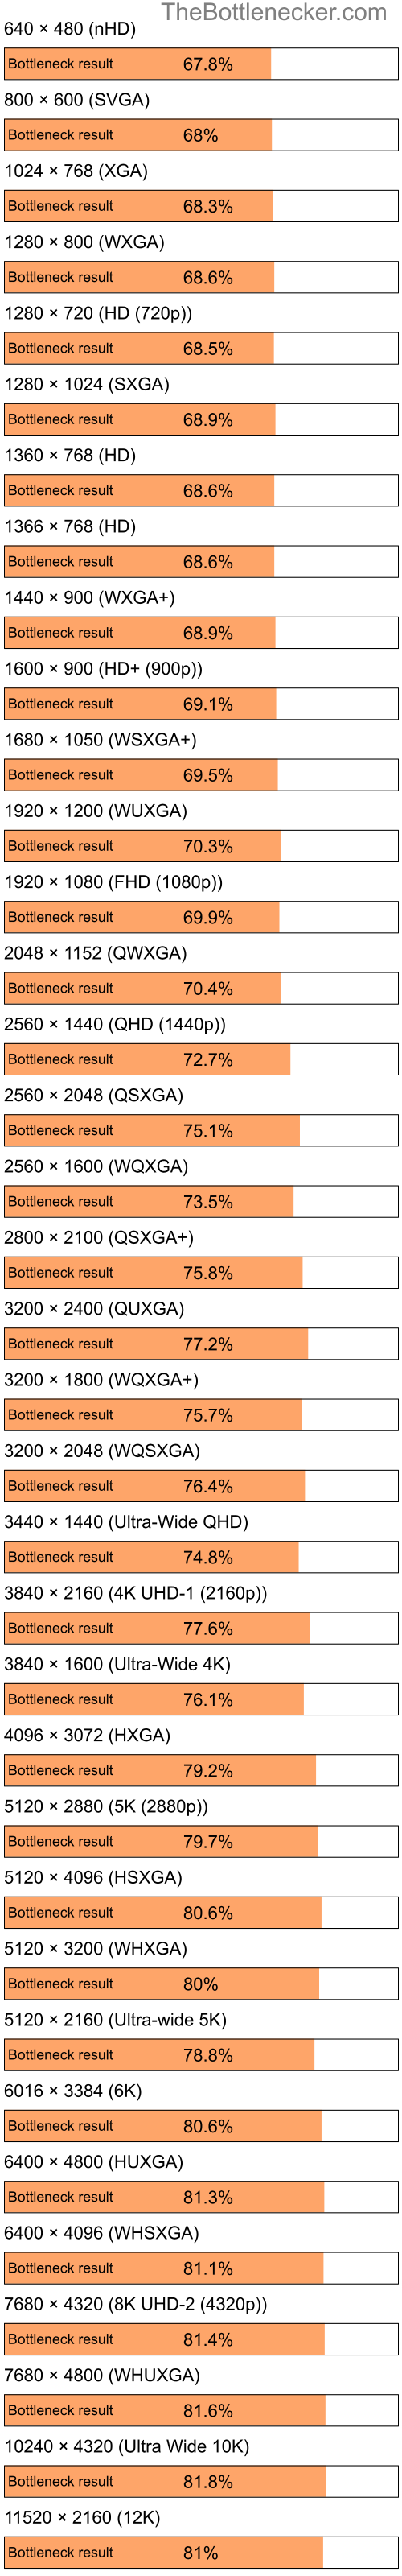 Bottleneck results by resolution for Intel Celeron M 410 and AMD Radeon HD 4200 in Graphic Card Intense Tasks